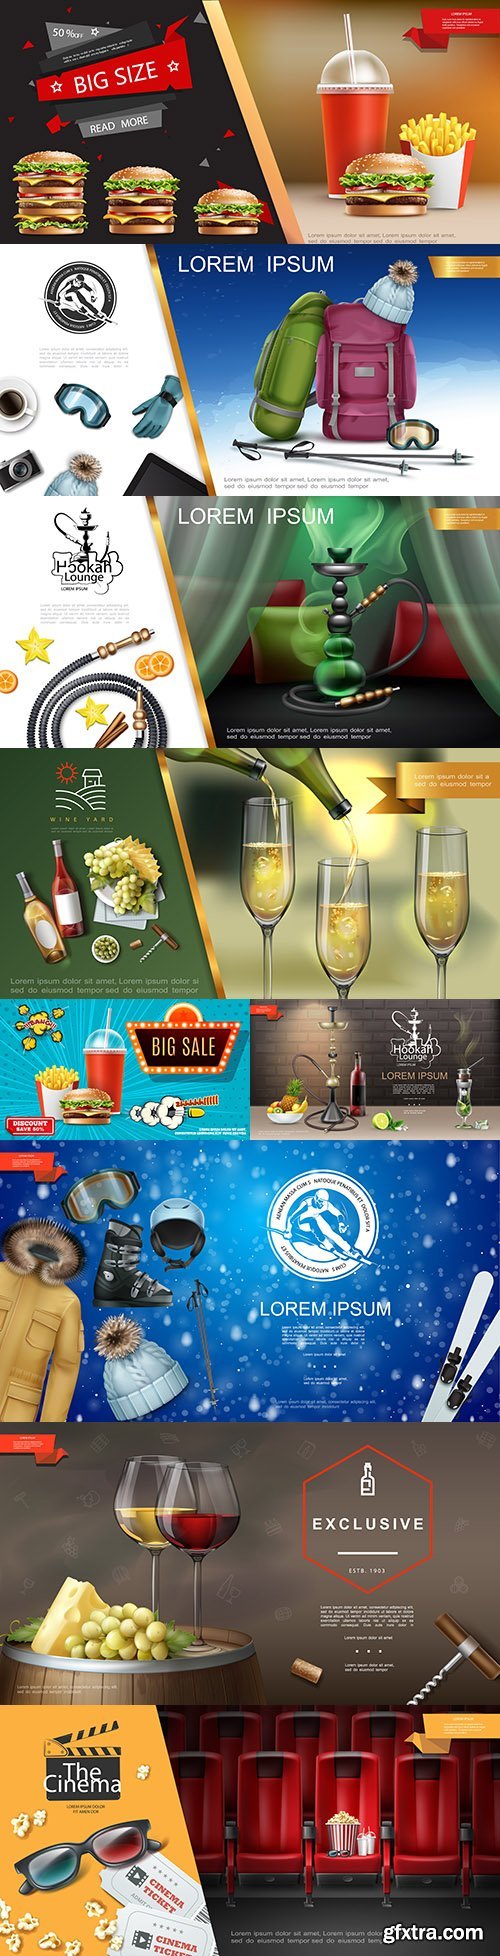 Realistic advertising 3rd template design products and objects